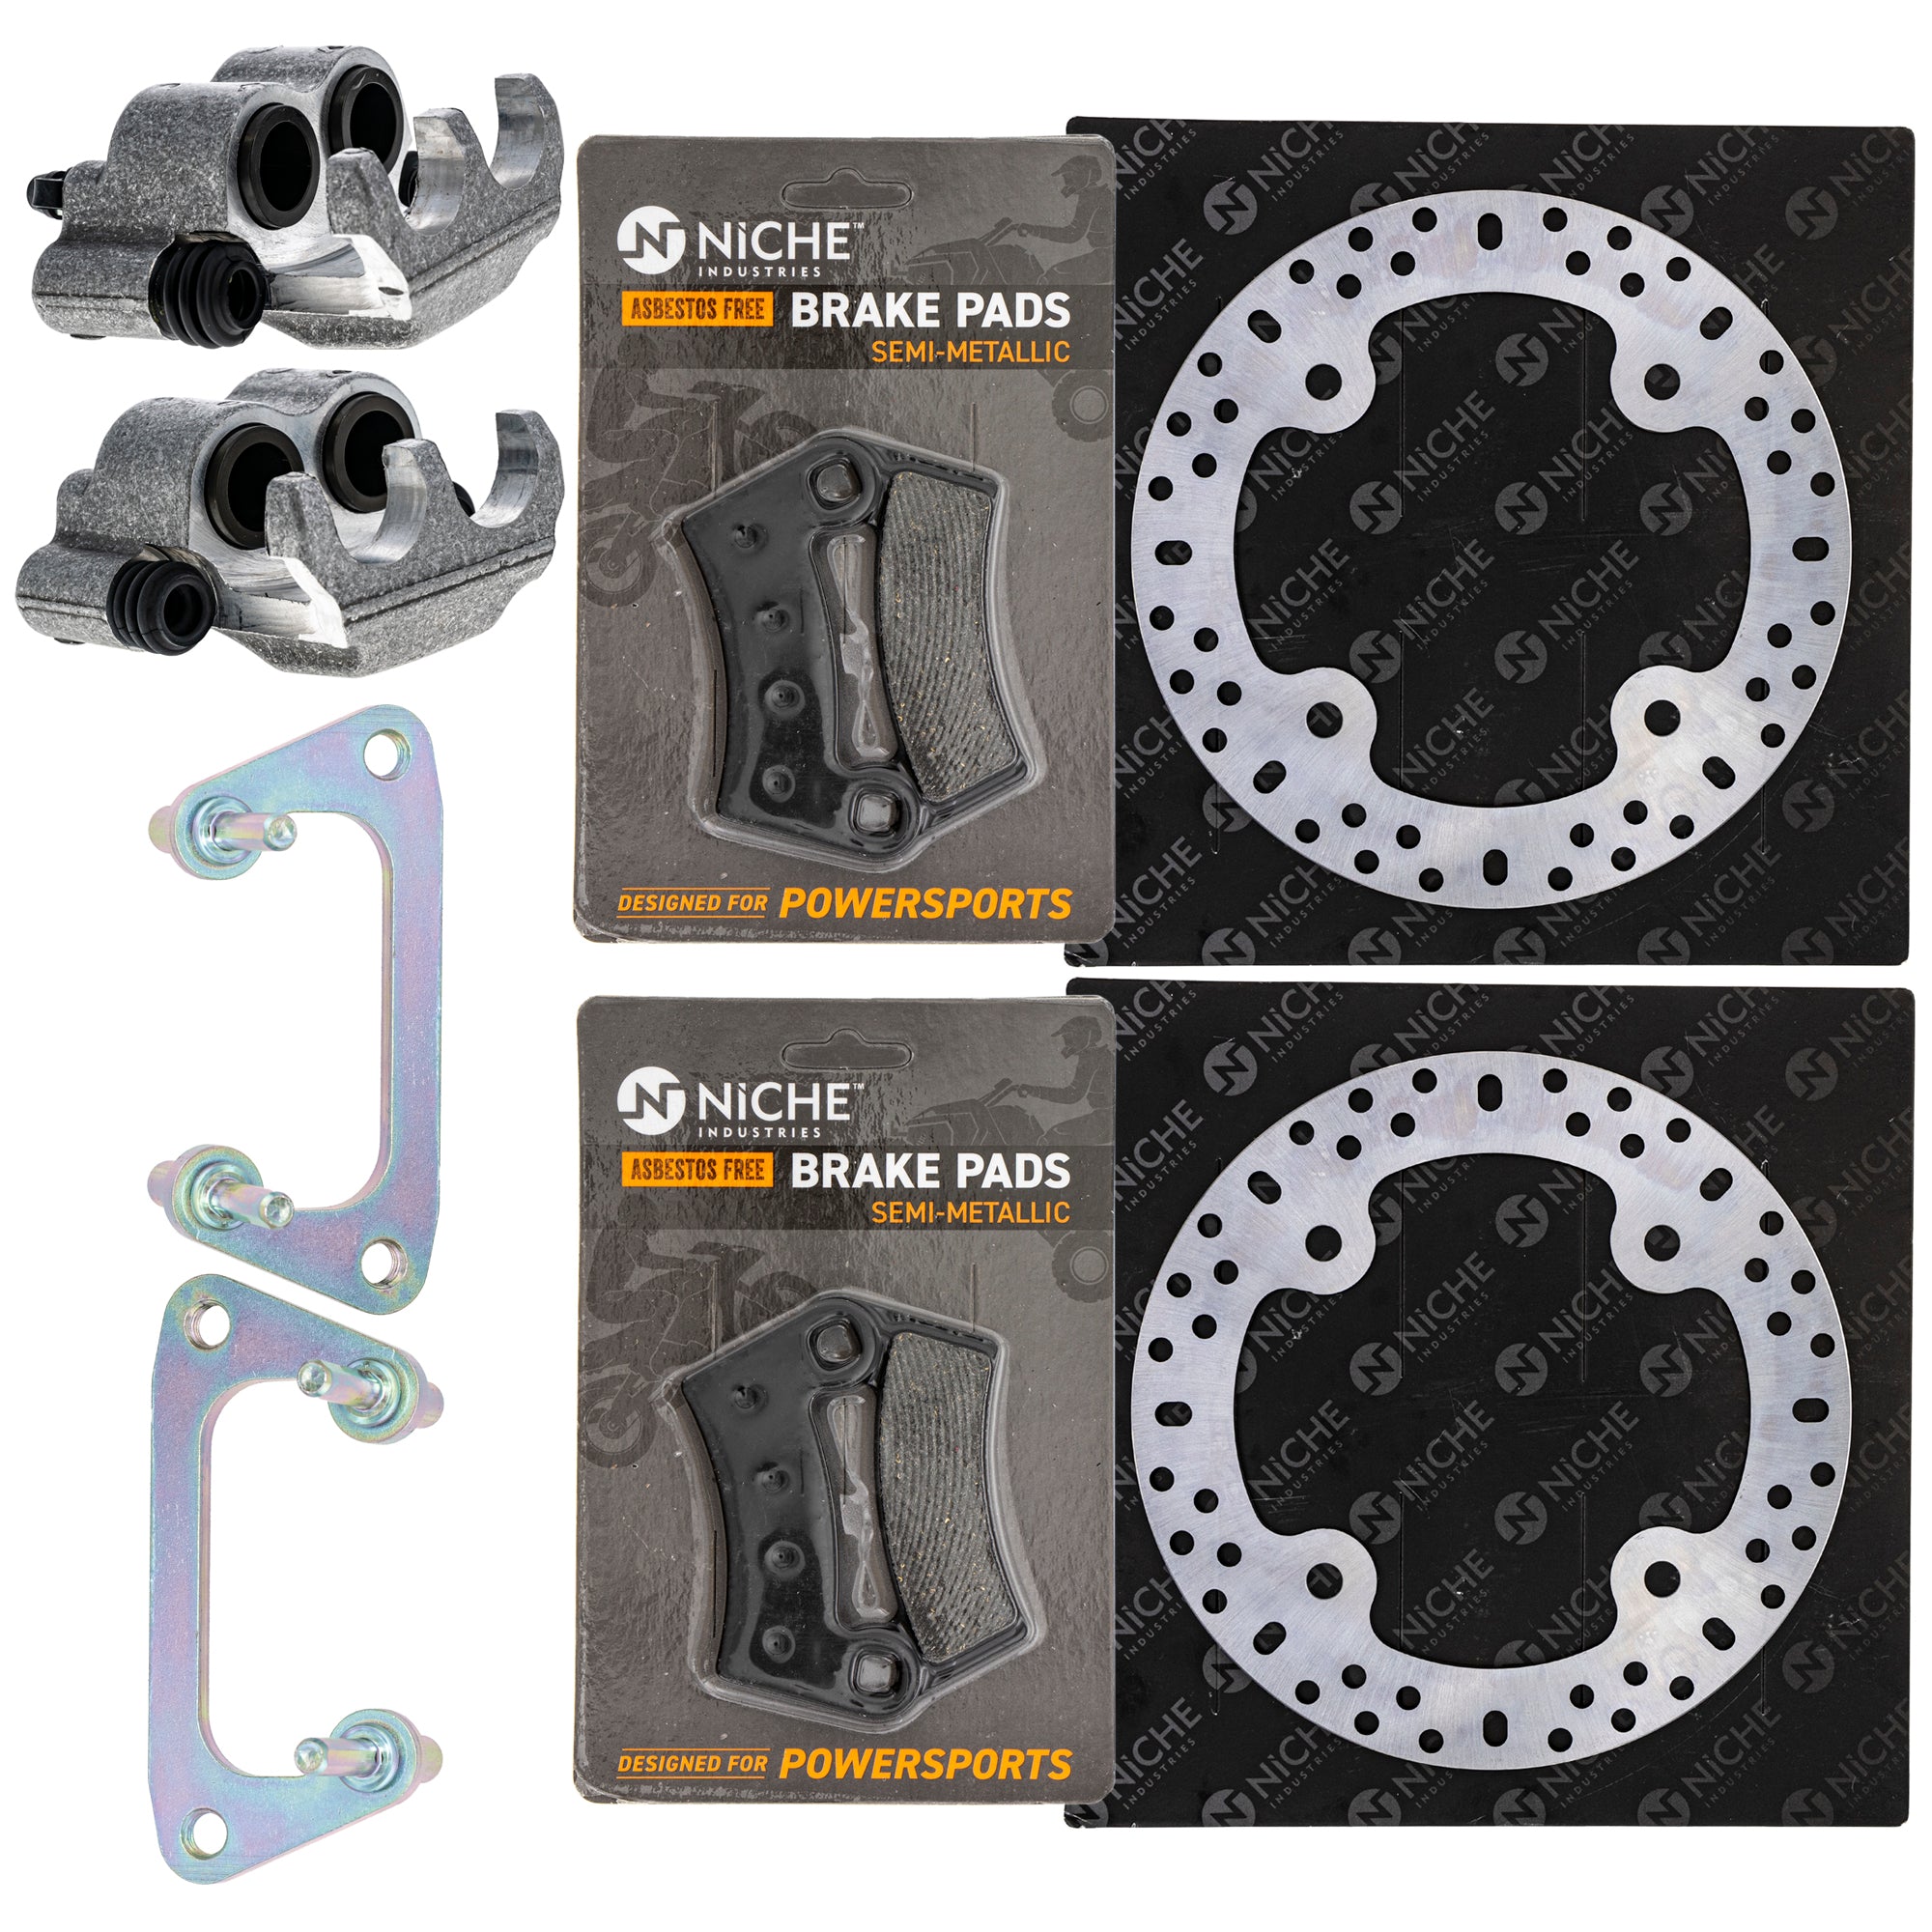 Front Brakes Rebuild Kit - Calipers, Rotors, Pads for zOTHER Polaris RZR NICHE MK1007966